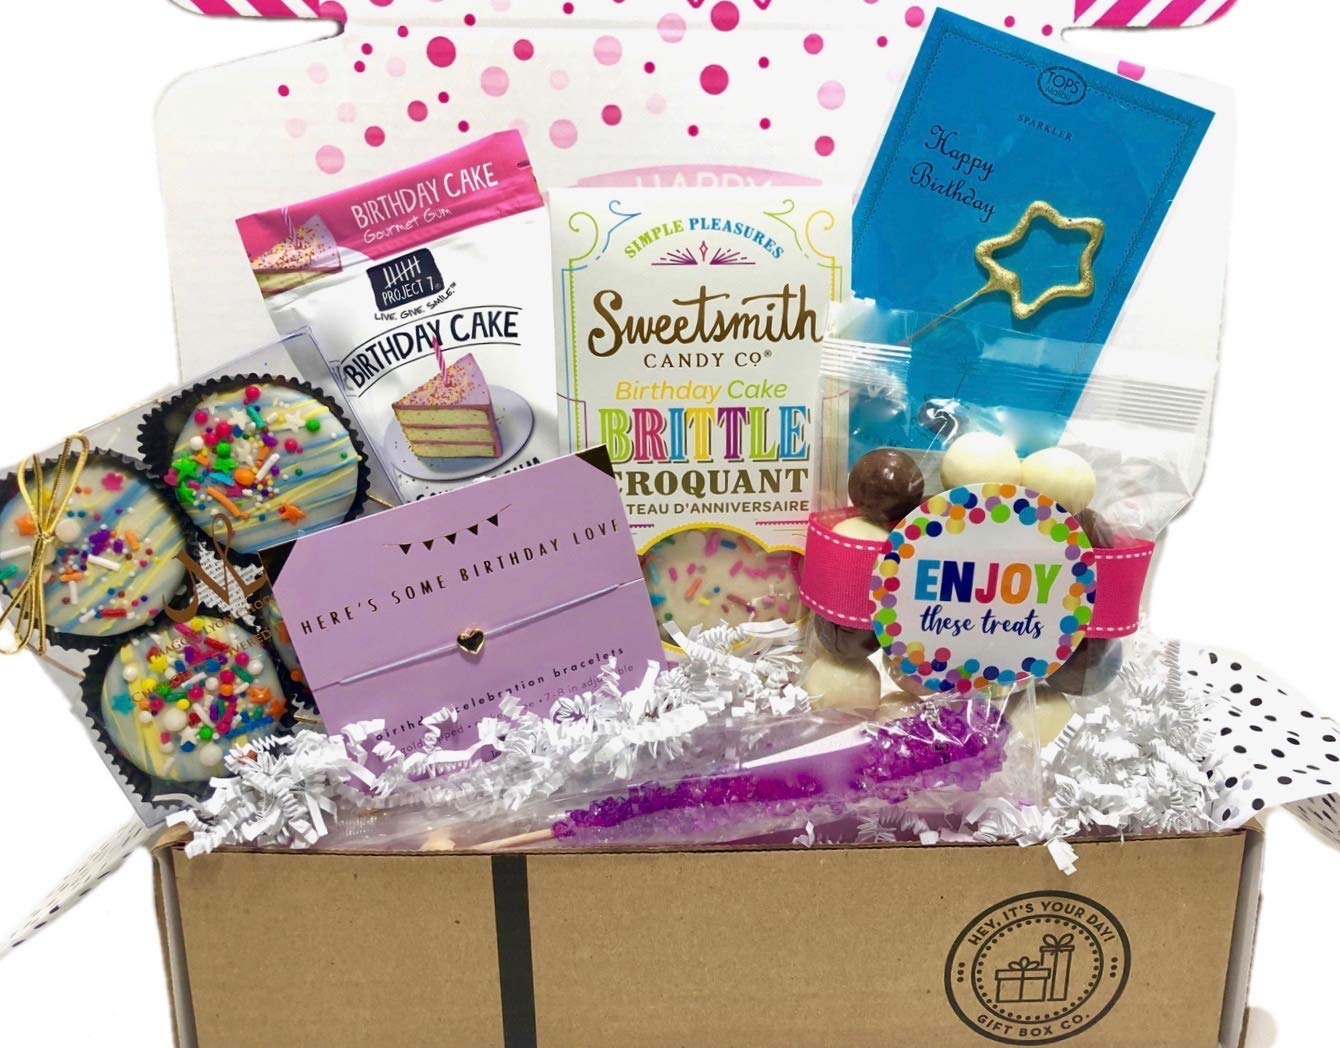 Birthday Gift Box Set Filled With Unique Treats & Surprise Gifts For Wife